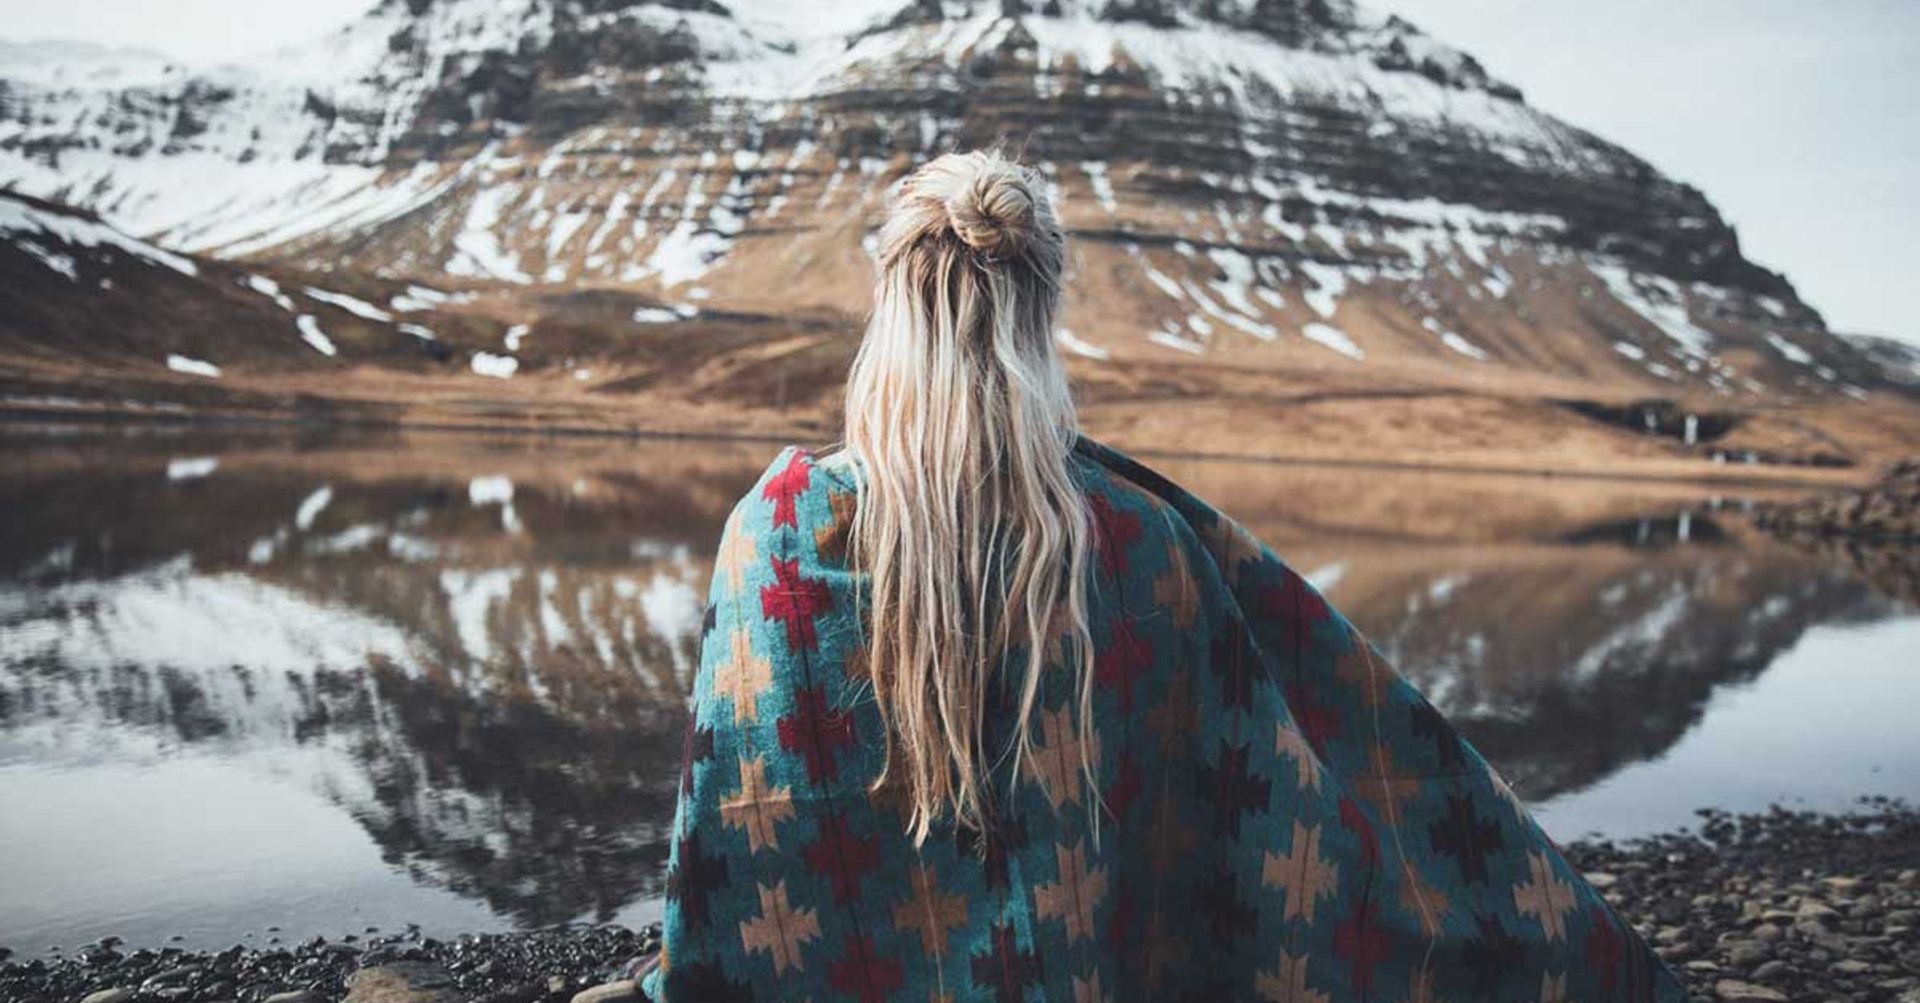 Woman in front of a snowy mountain in Iceland 